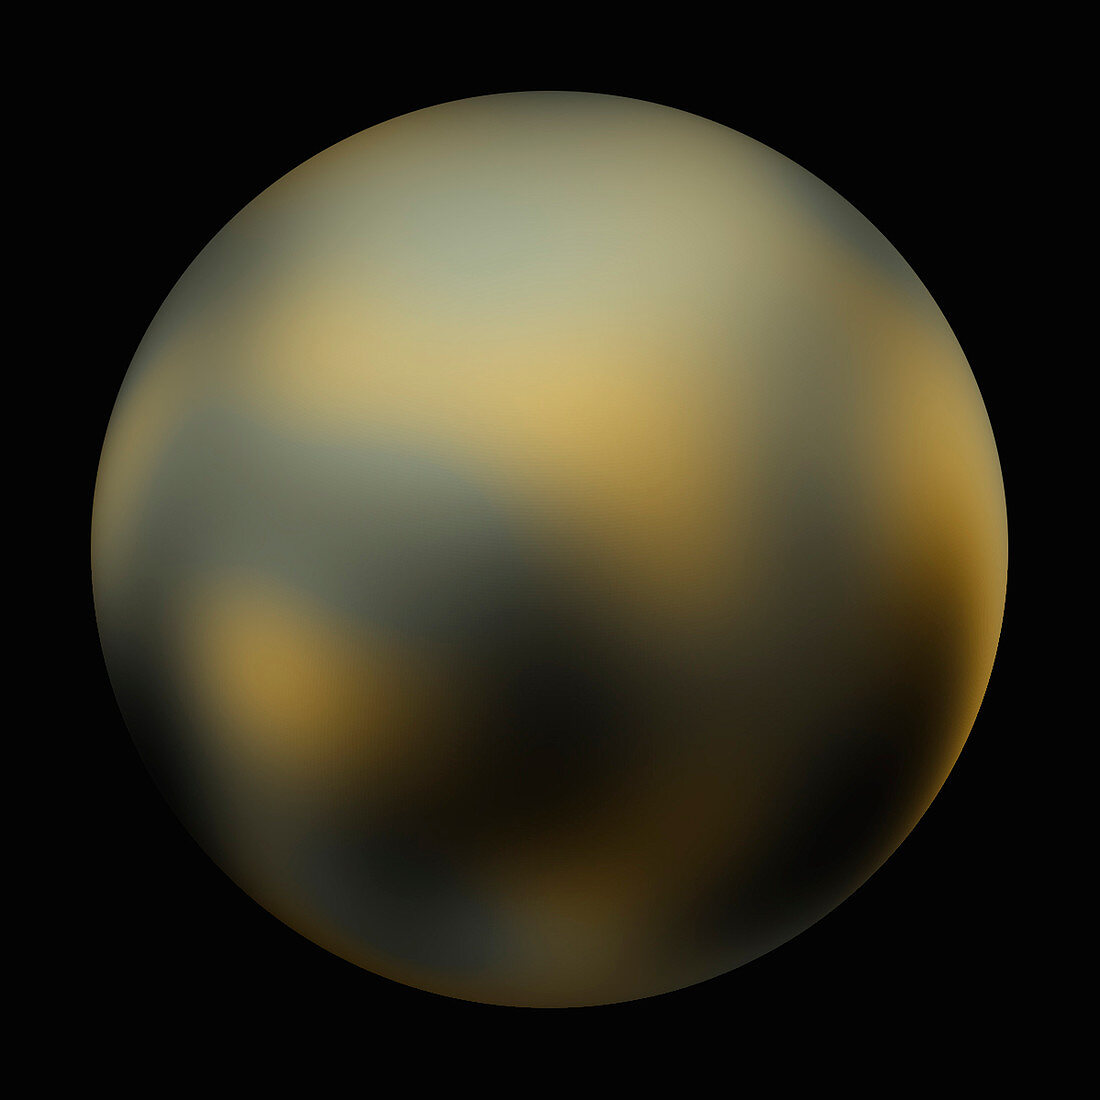 Surface of Pluto,Hubble image